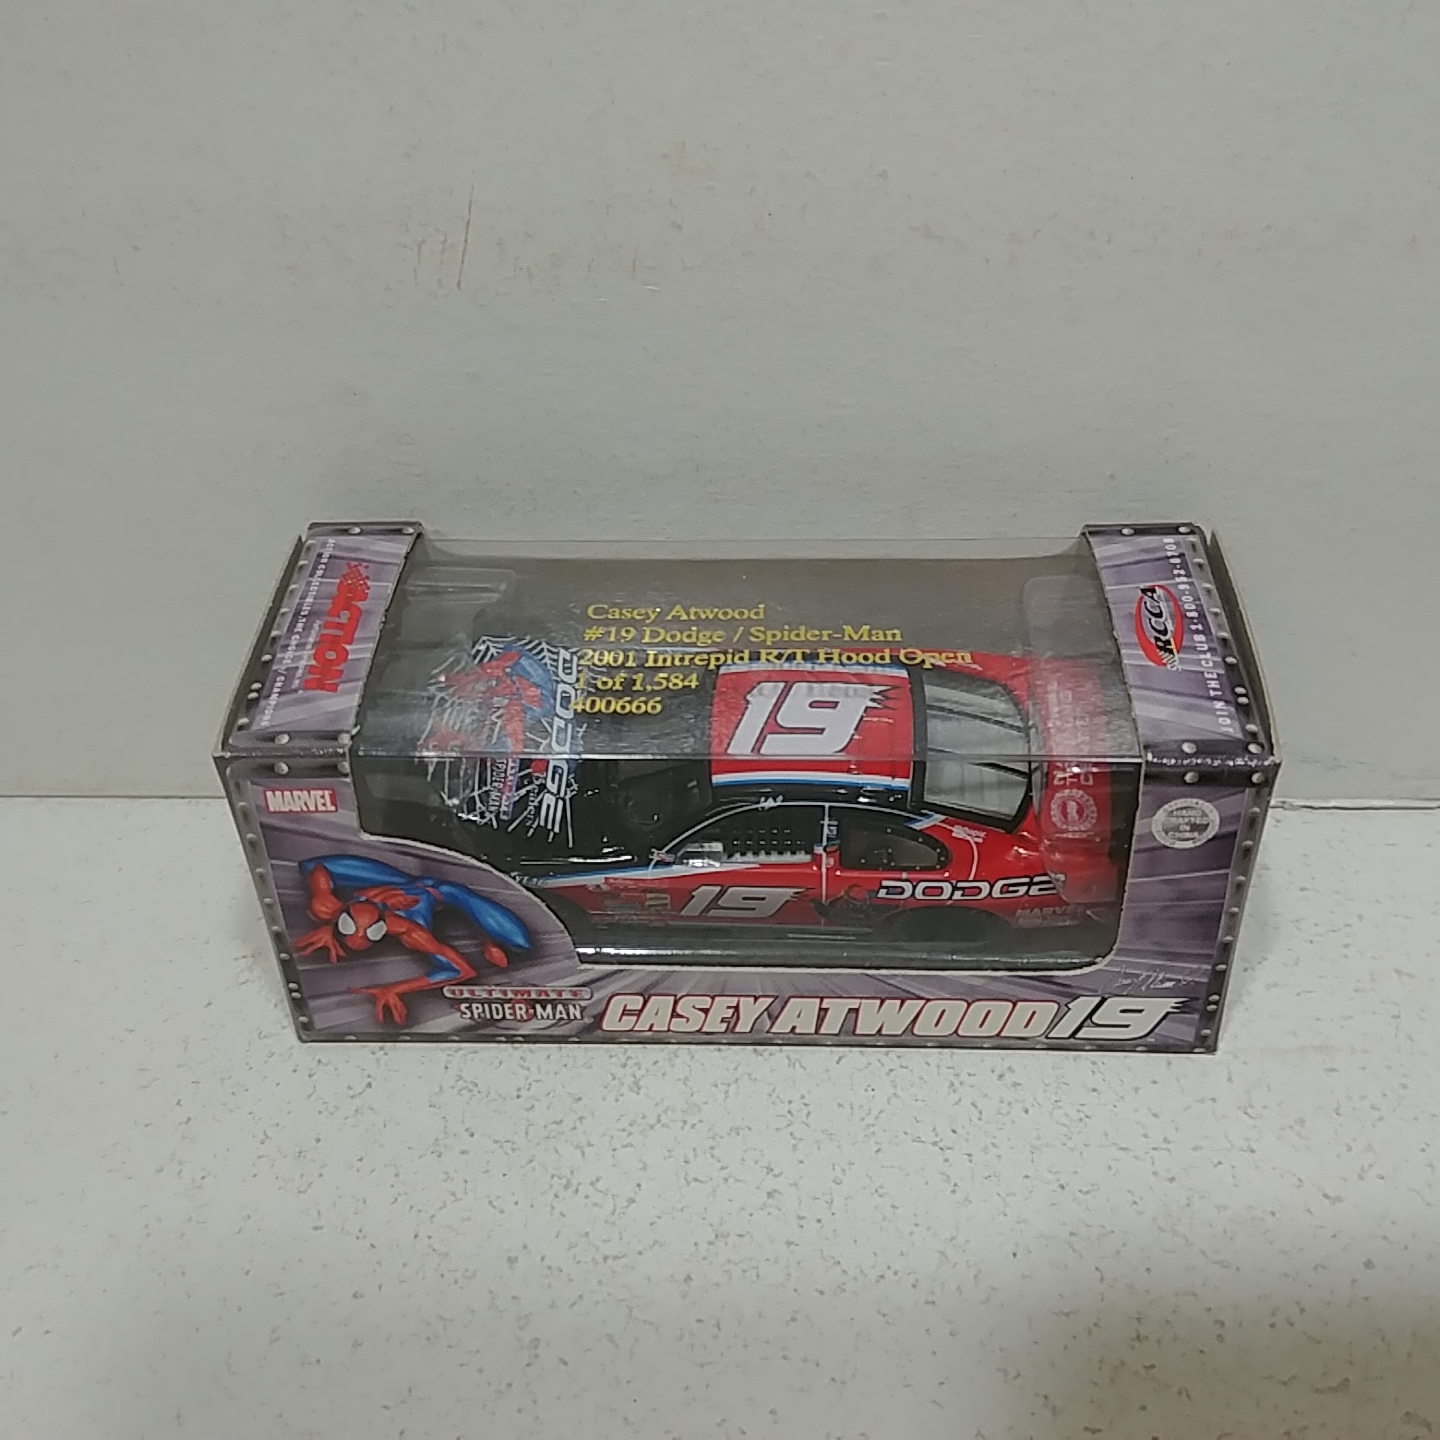 2001 Casey Atwood 1/64th Dodge "Spiderman" RCCA hood open Intrepid